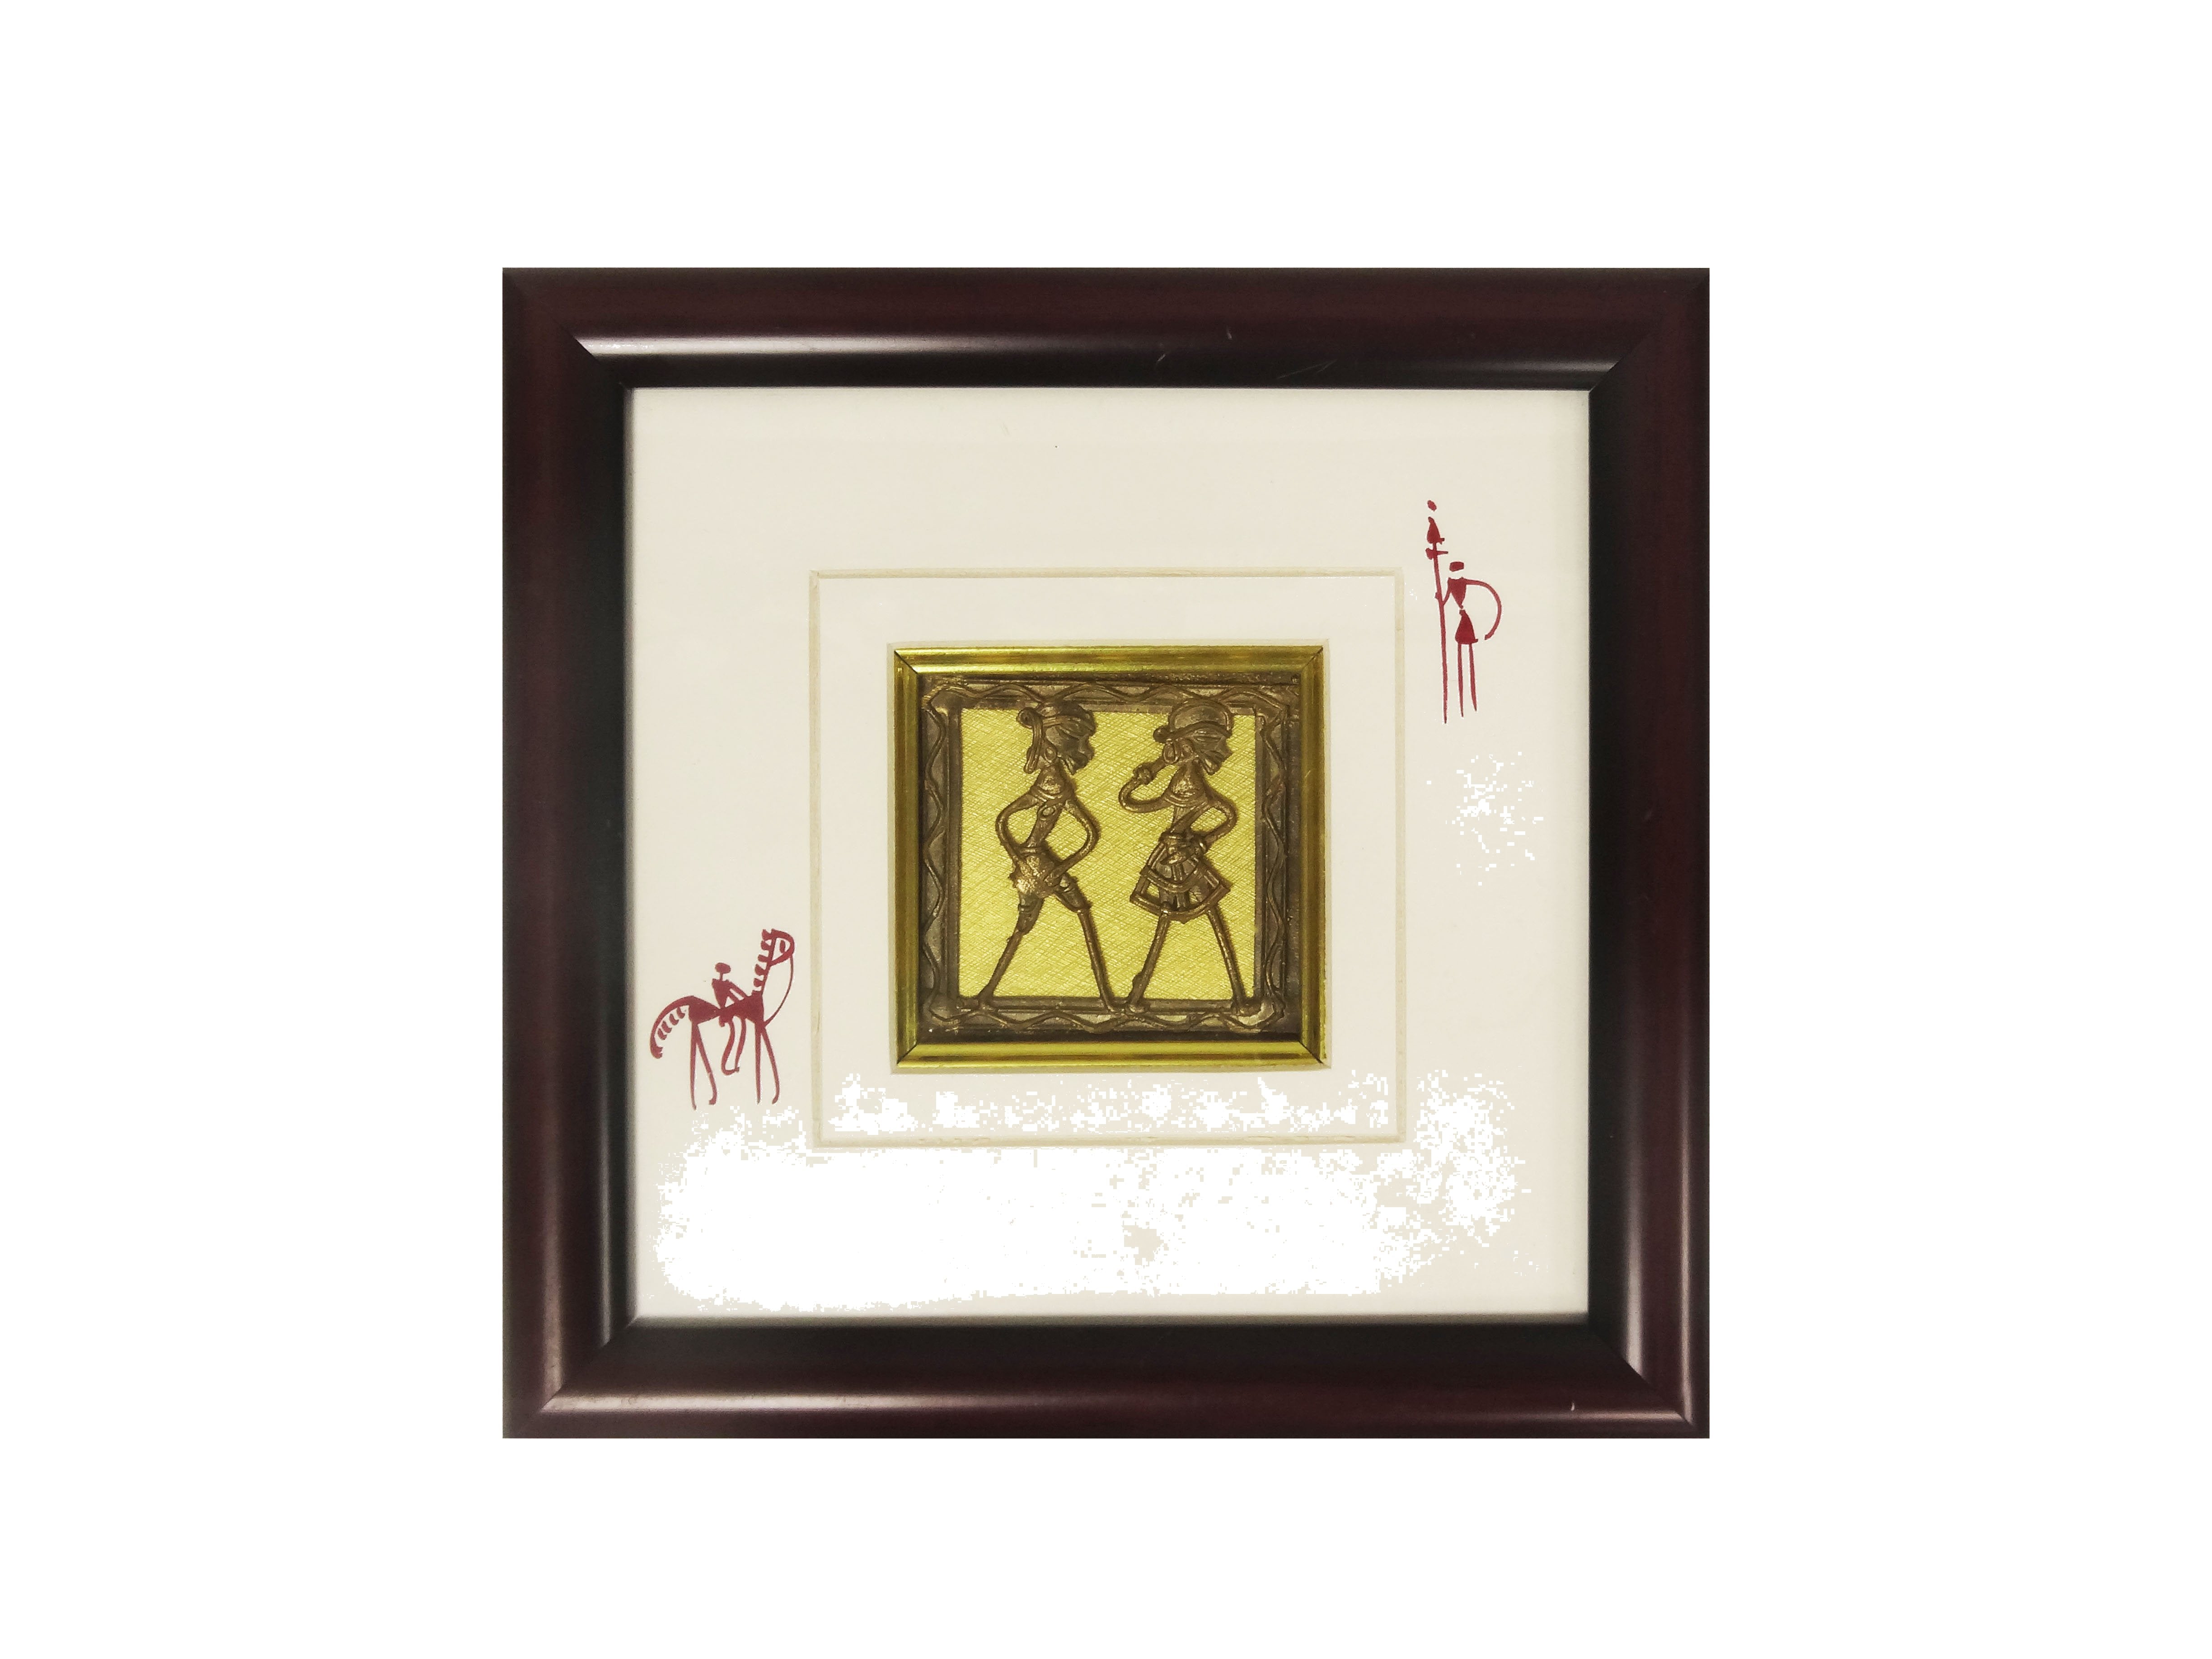 Dokra Handicraft Tribal Art Wall Hanging Happiness in Togetherness with Fiber Frame 8.5"x8.5"